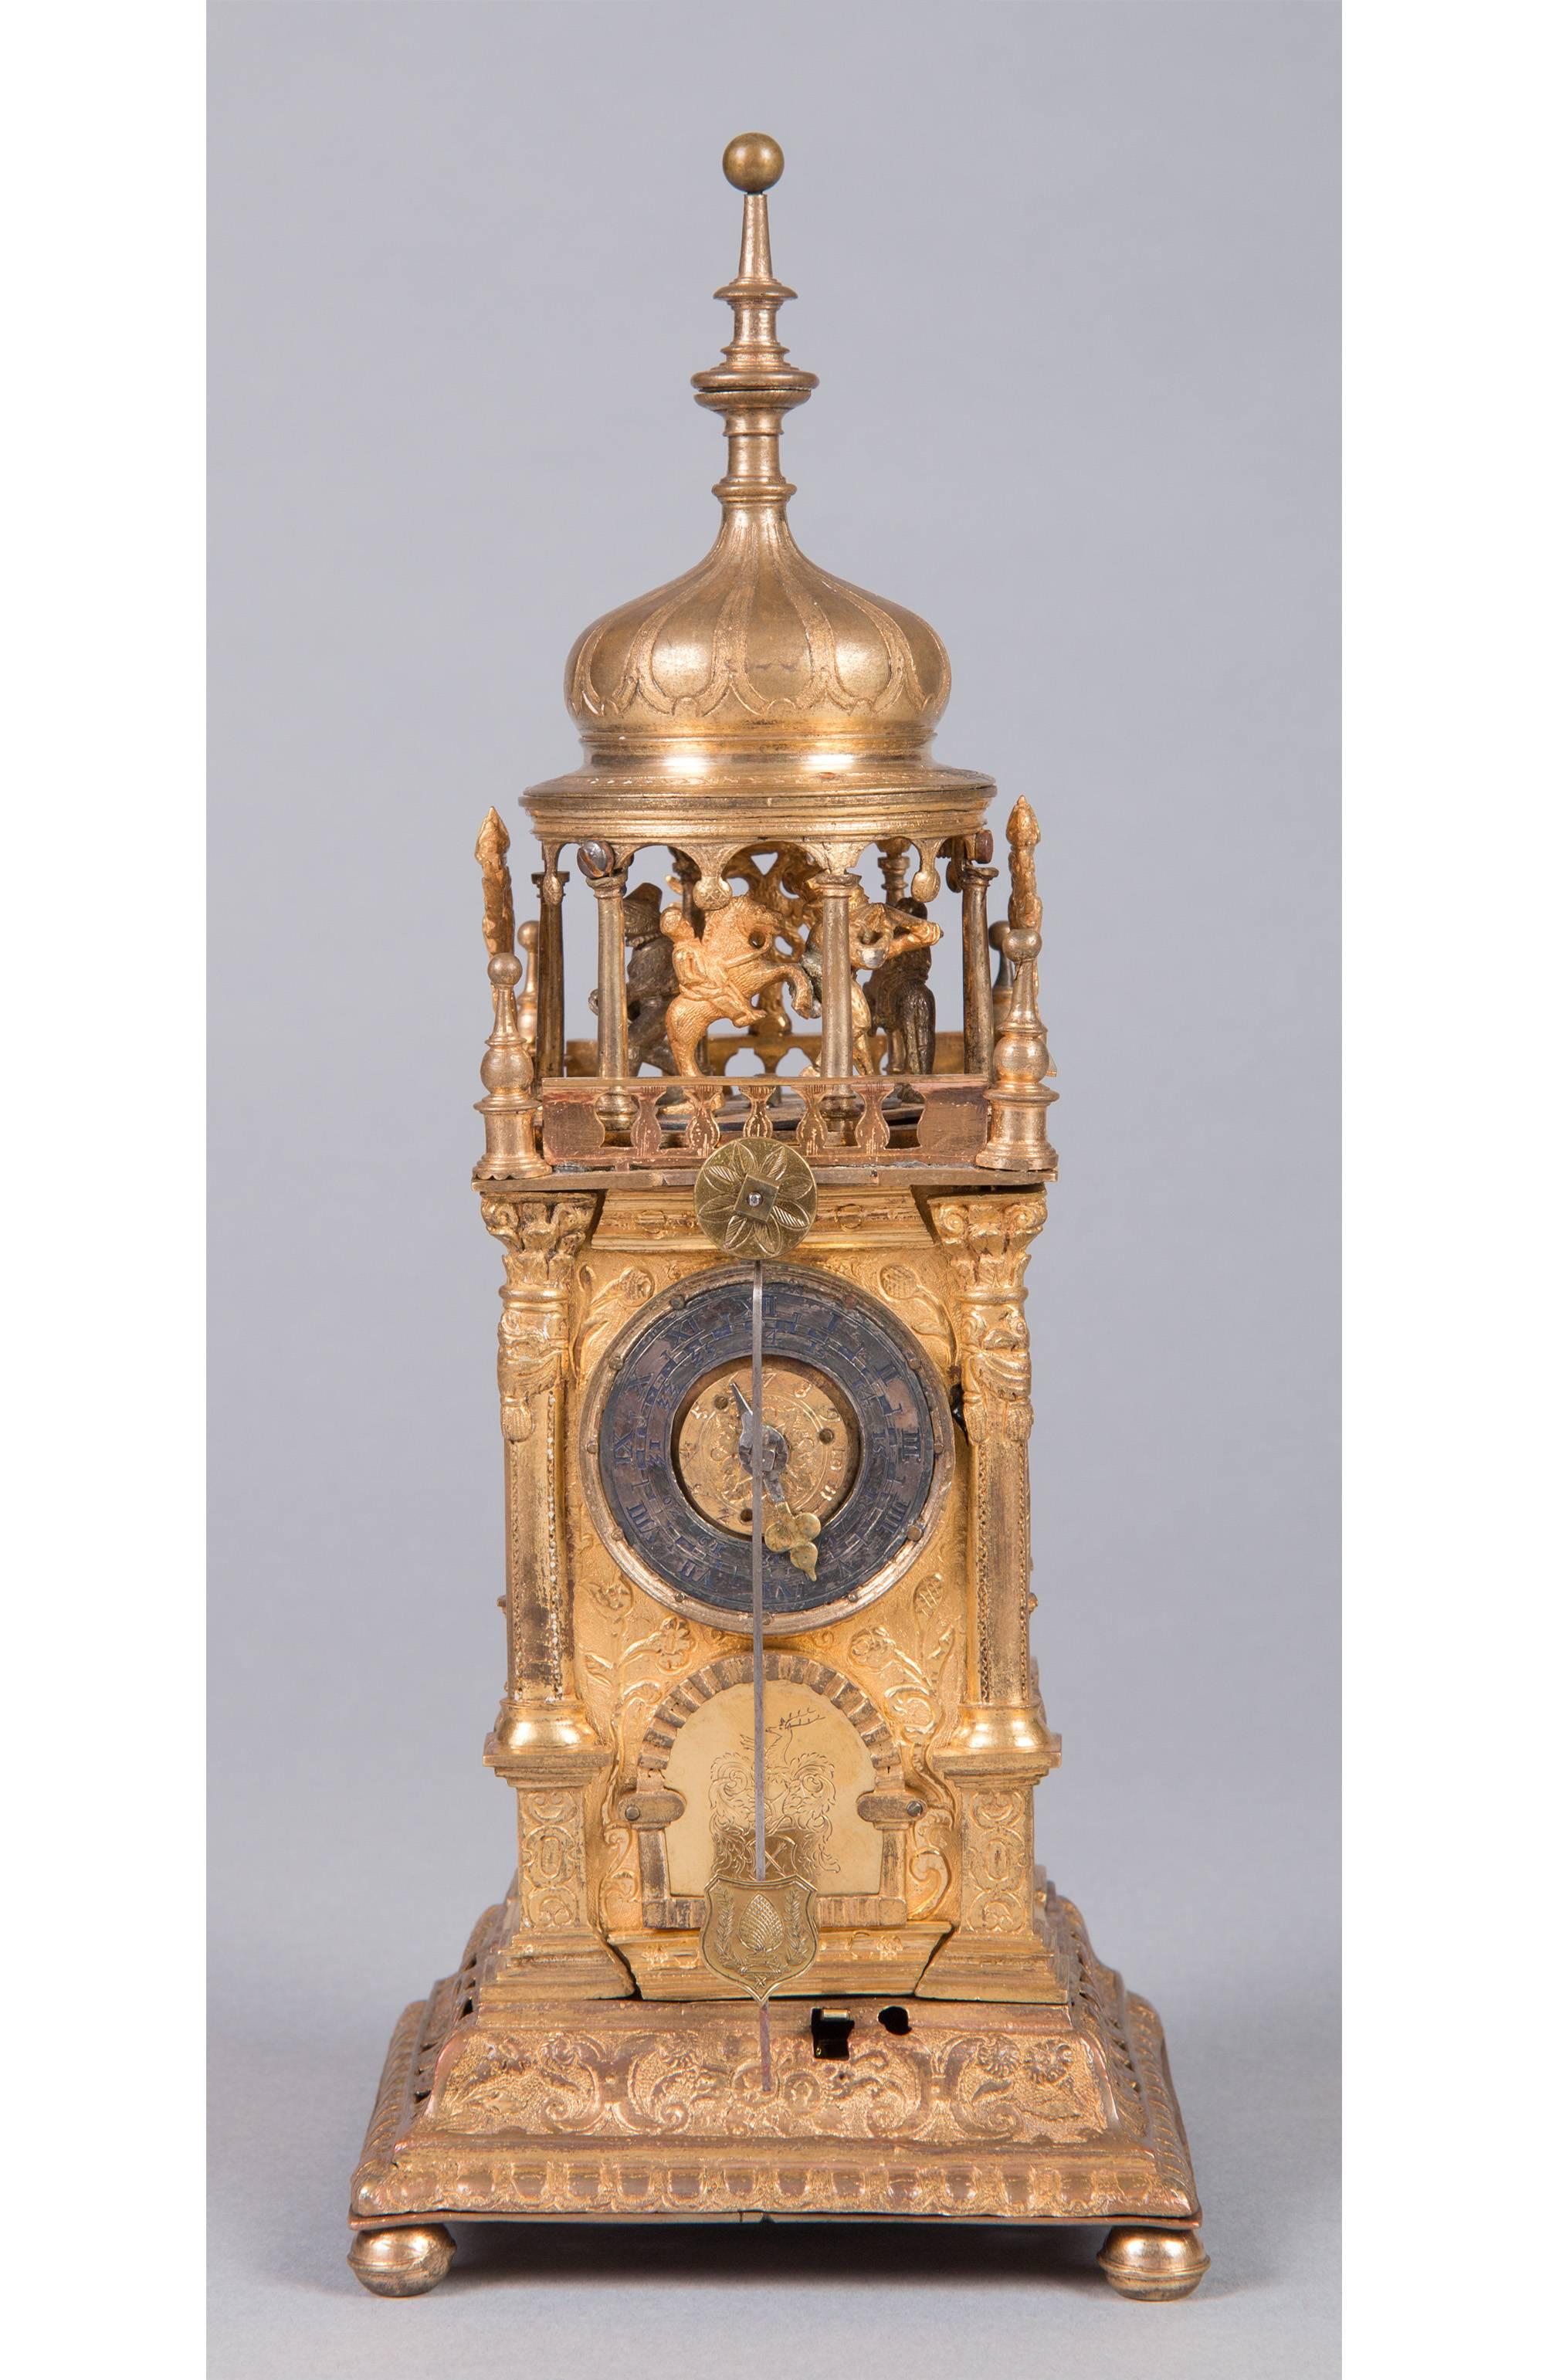 Marking punch: “I.M.”
Augsburg, circa 1600
Measures: Height 30 cm
Gilt brass case with figural motifs in Églomisé work and figure automat, copper tower-form, striking work with chain and fuse and alarm in the plinth area, three windings and two